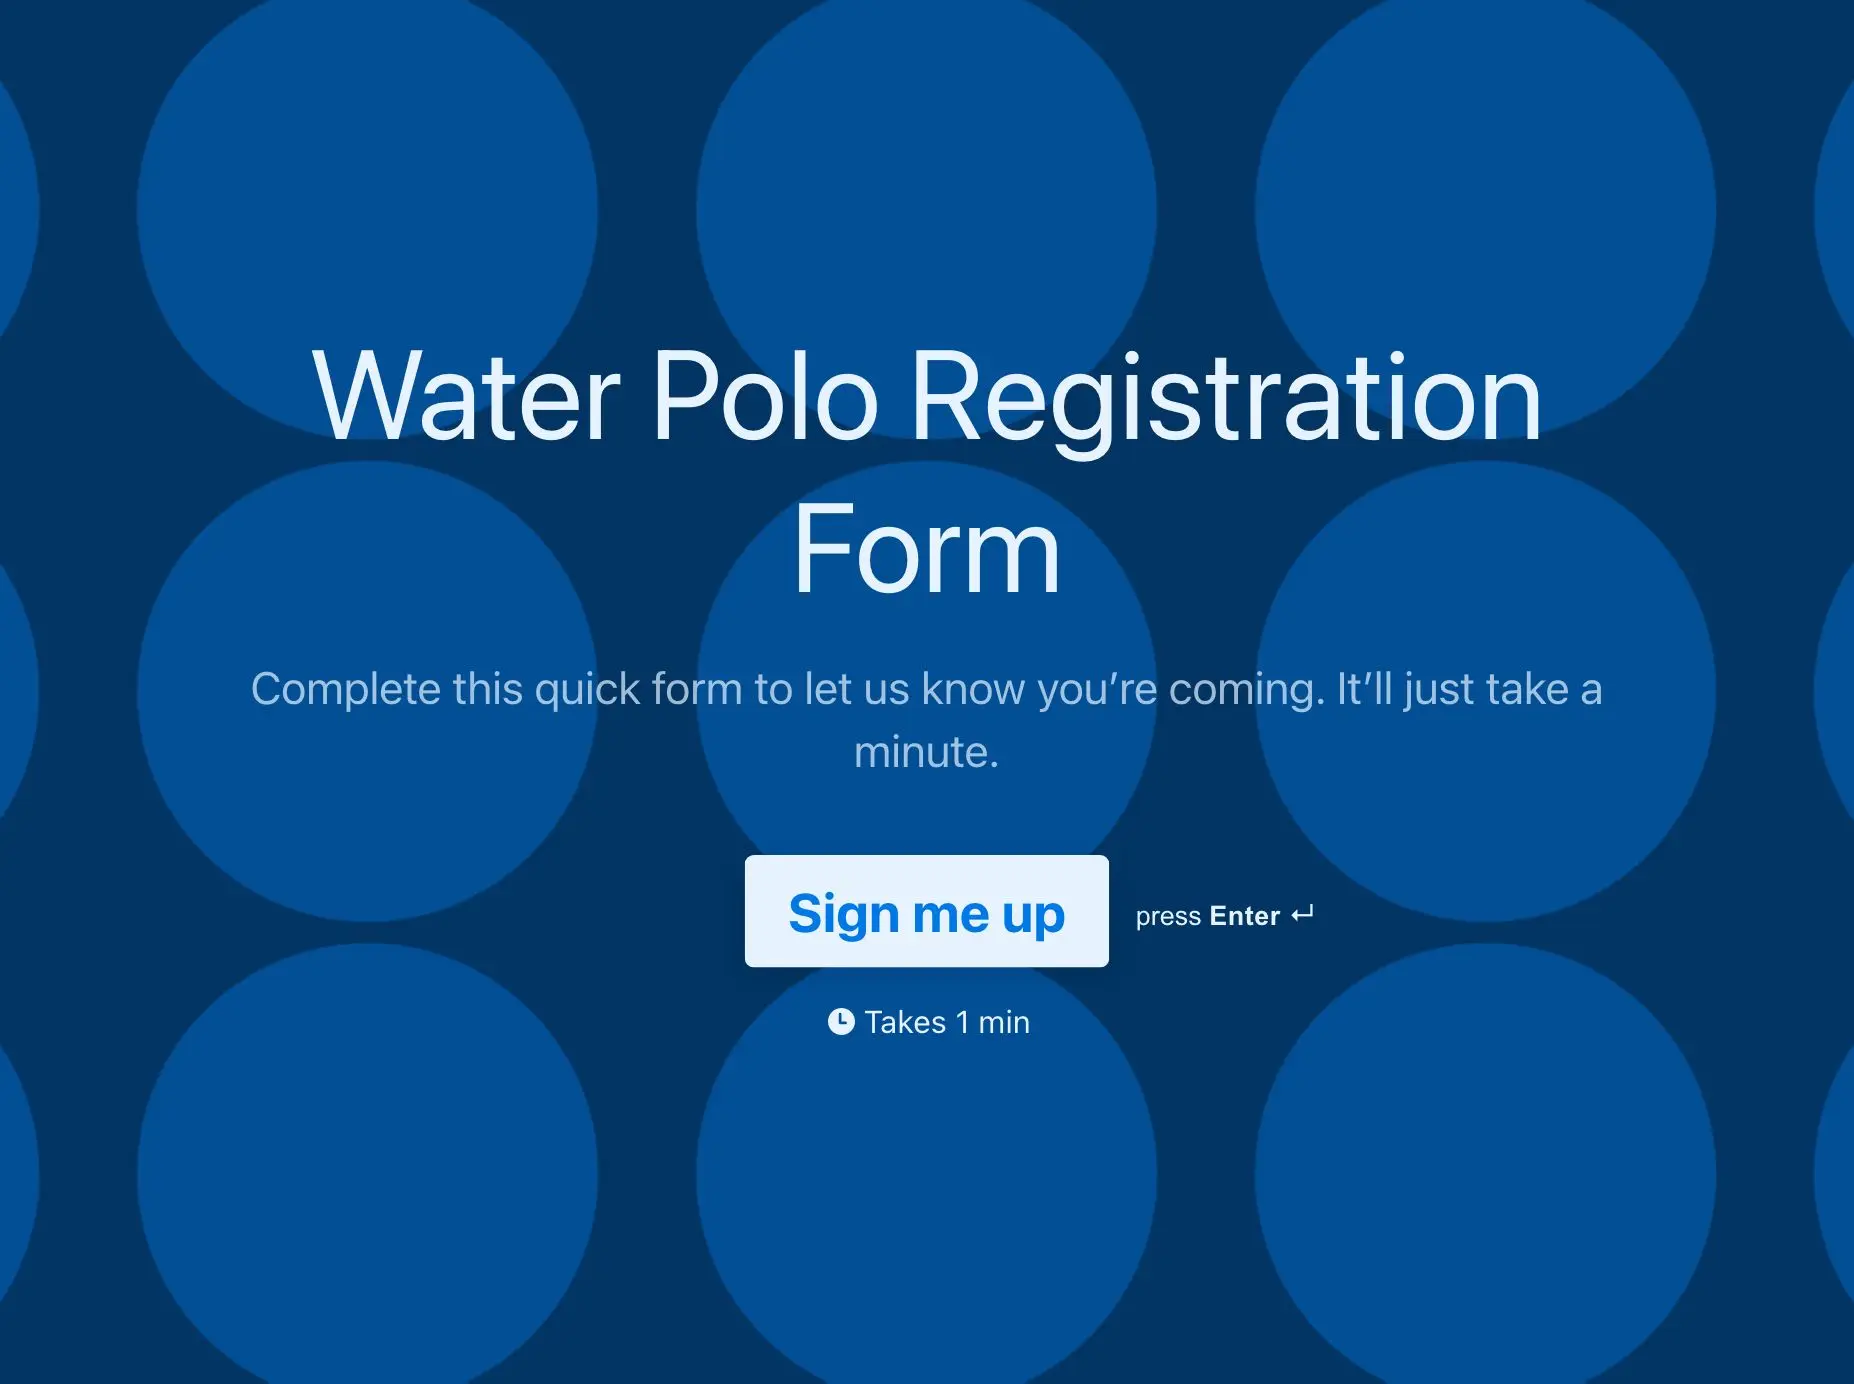 Water Polo Registration Form Template Hero